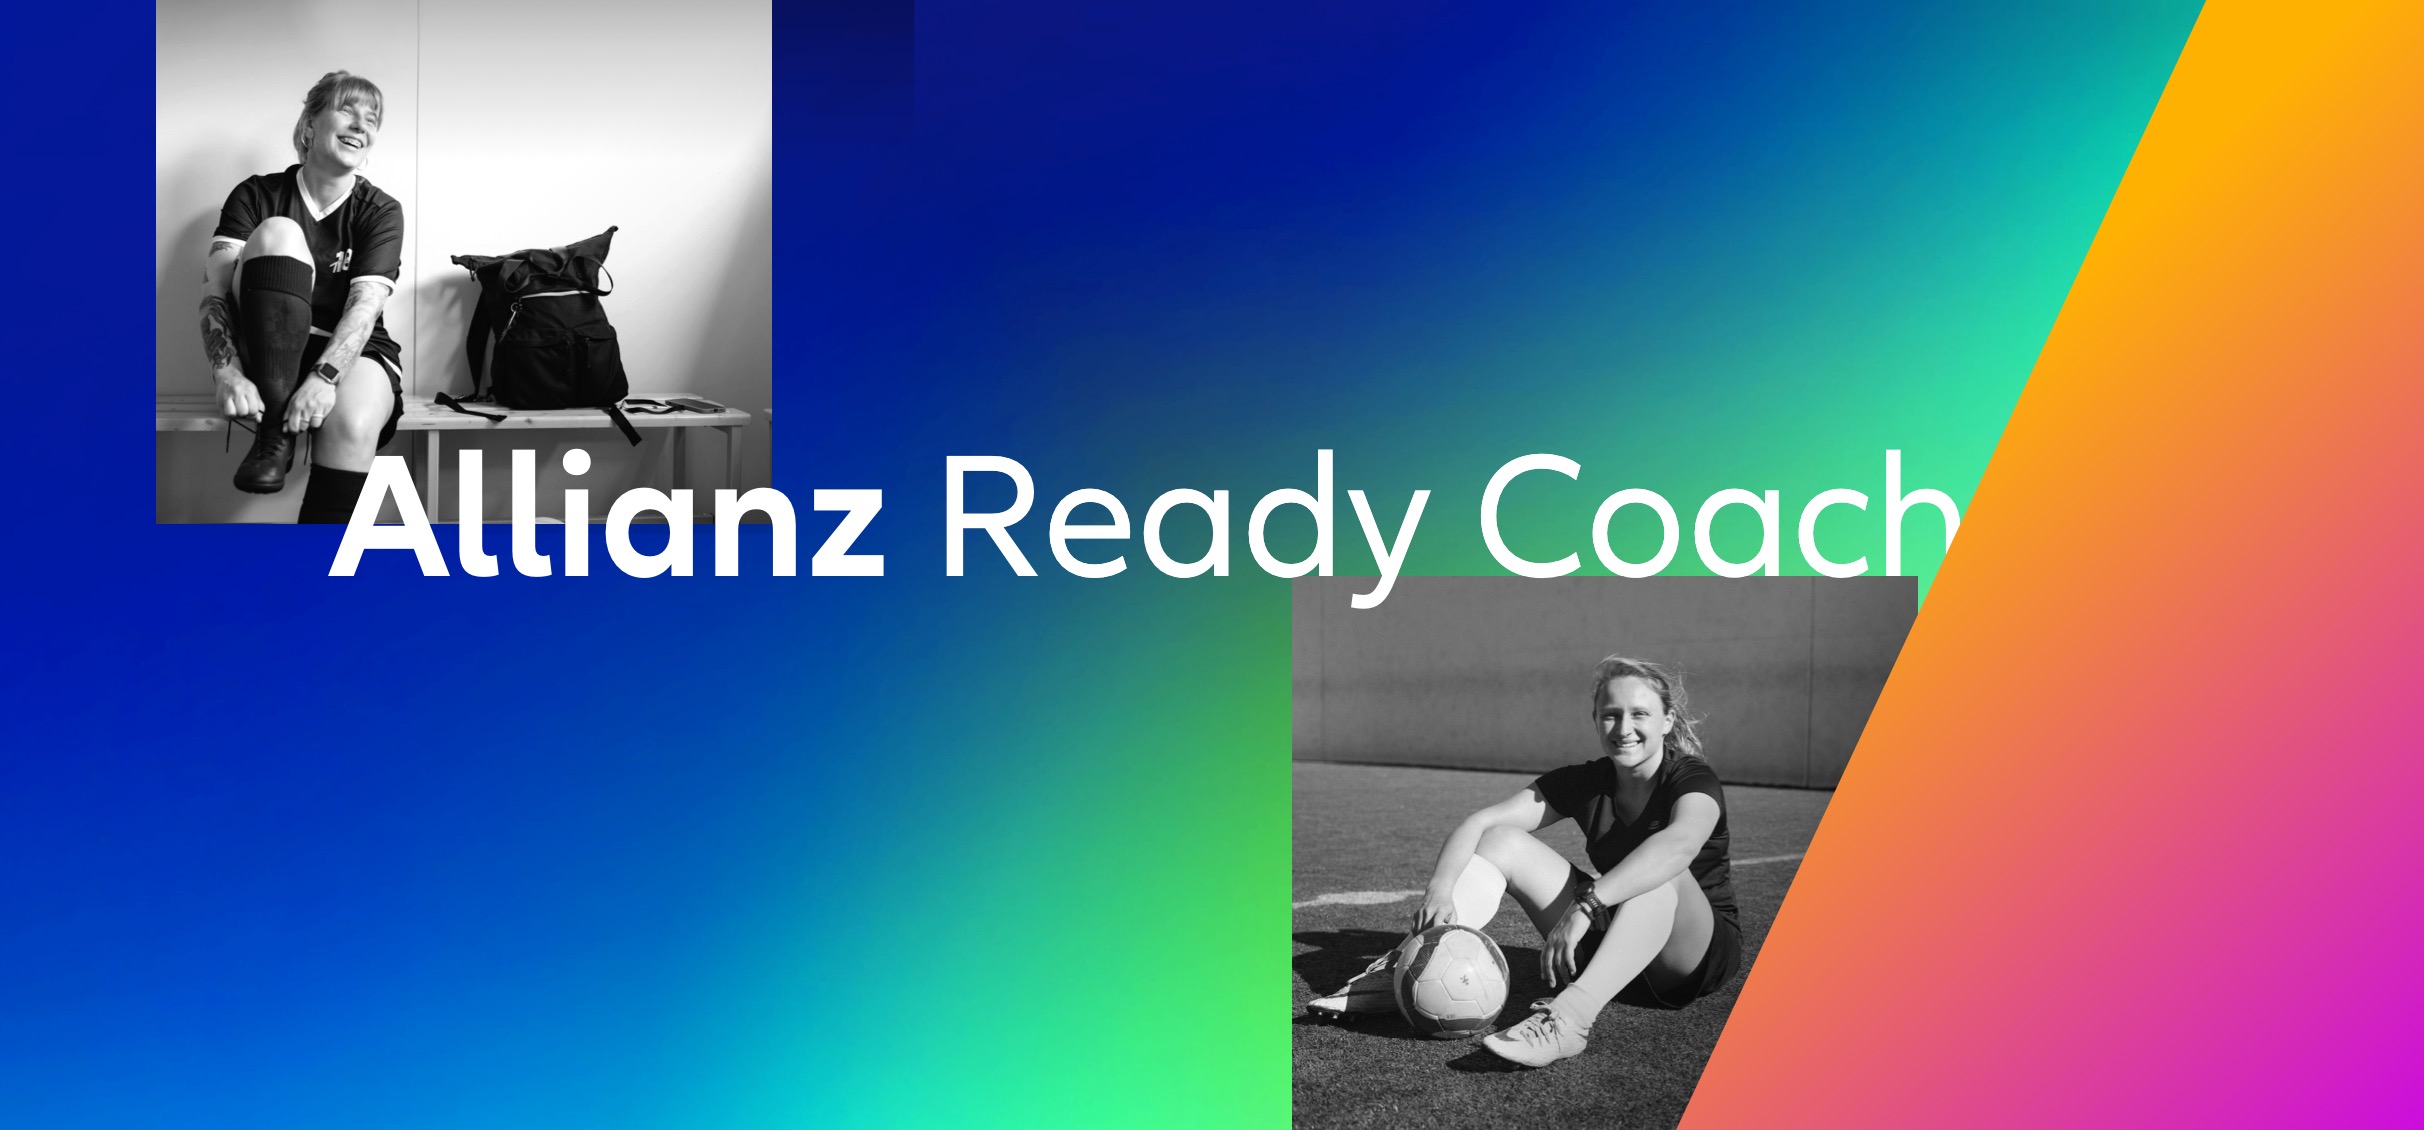 Allianz Ready Coach Headline with a collage of two footballer women